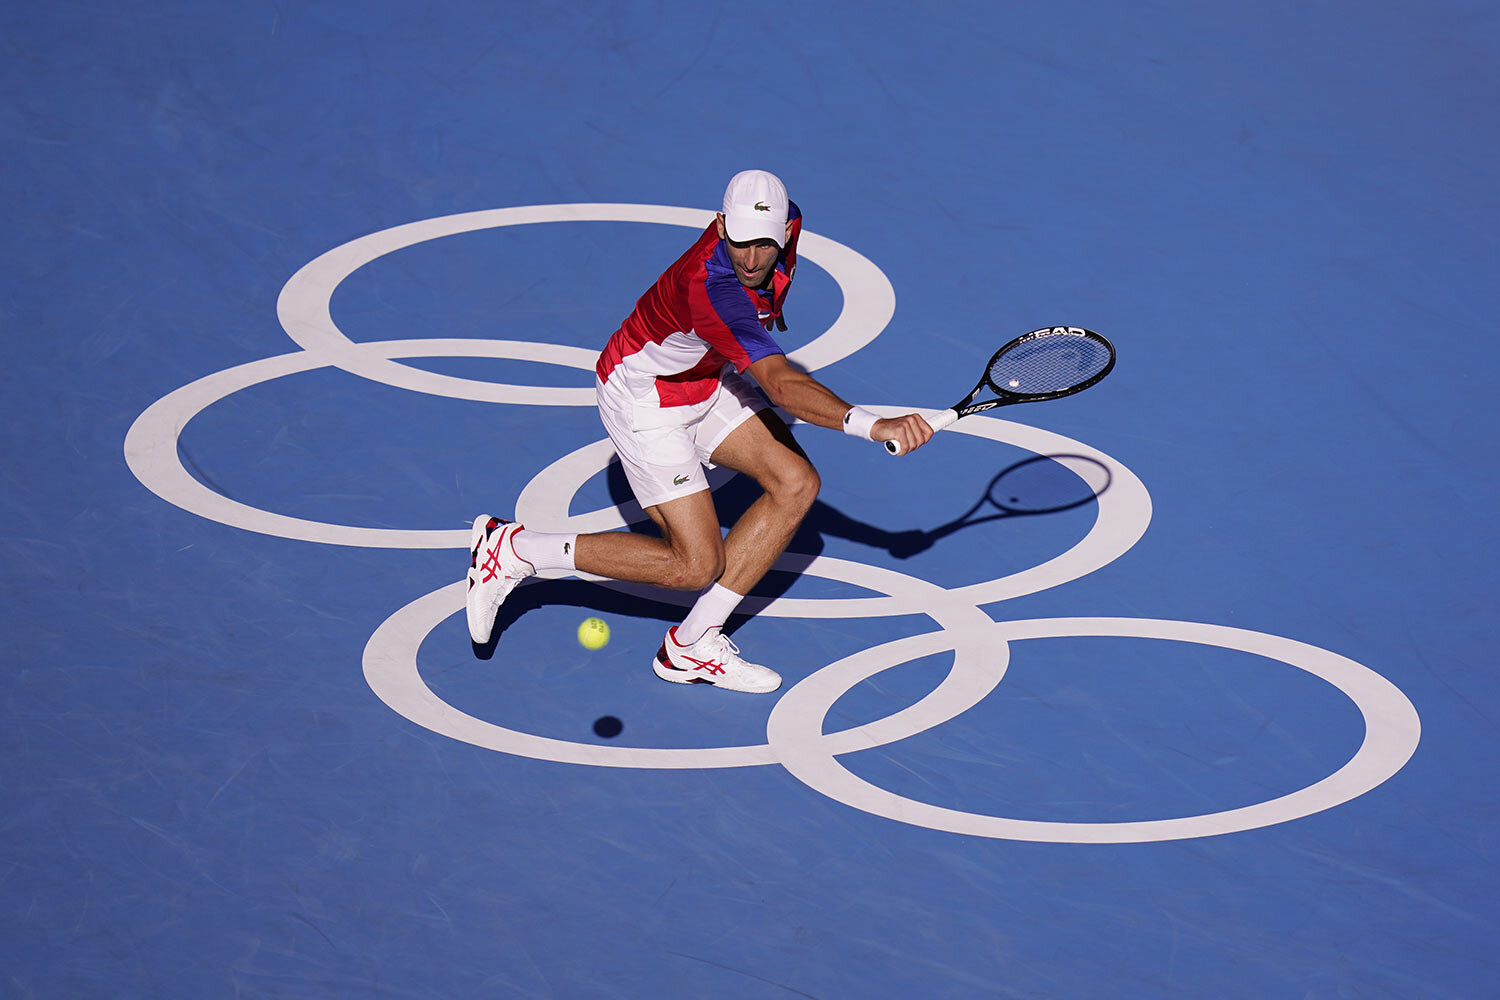  Novak Djokovic, of Serbia, returns a shot to Pablo Carreno Busta, of Spain, during the bronze medal match of the tennis competition at the 2020 Summer Olympics, Saturday, July 31, 2021, in Tokyo, Japan. (AP Photo/Seth Wenig) 